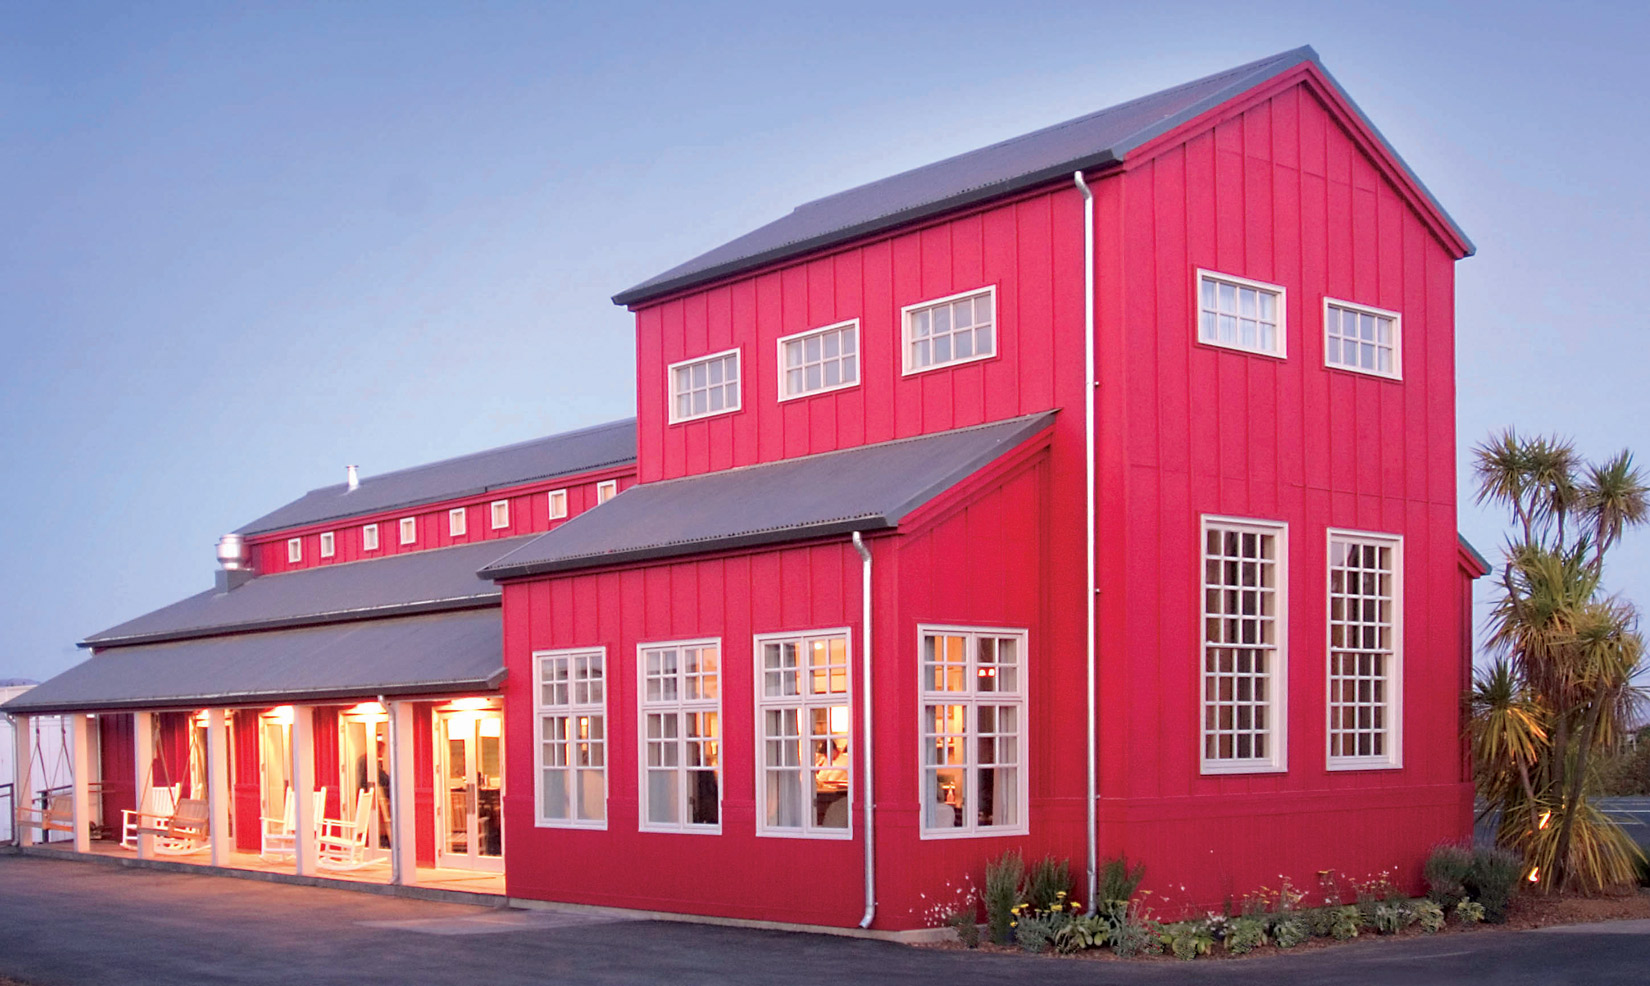 JLC completed construction on the new Boon Fly Cafe for Carneros Inn